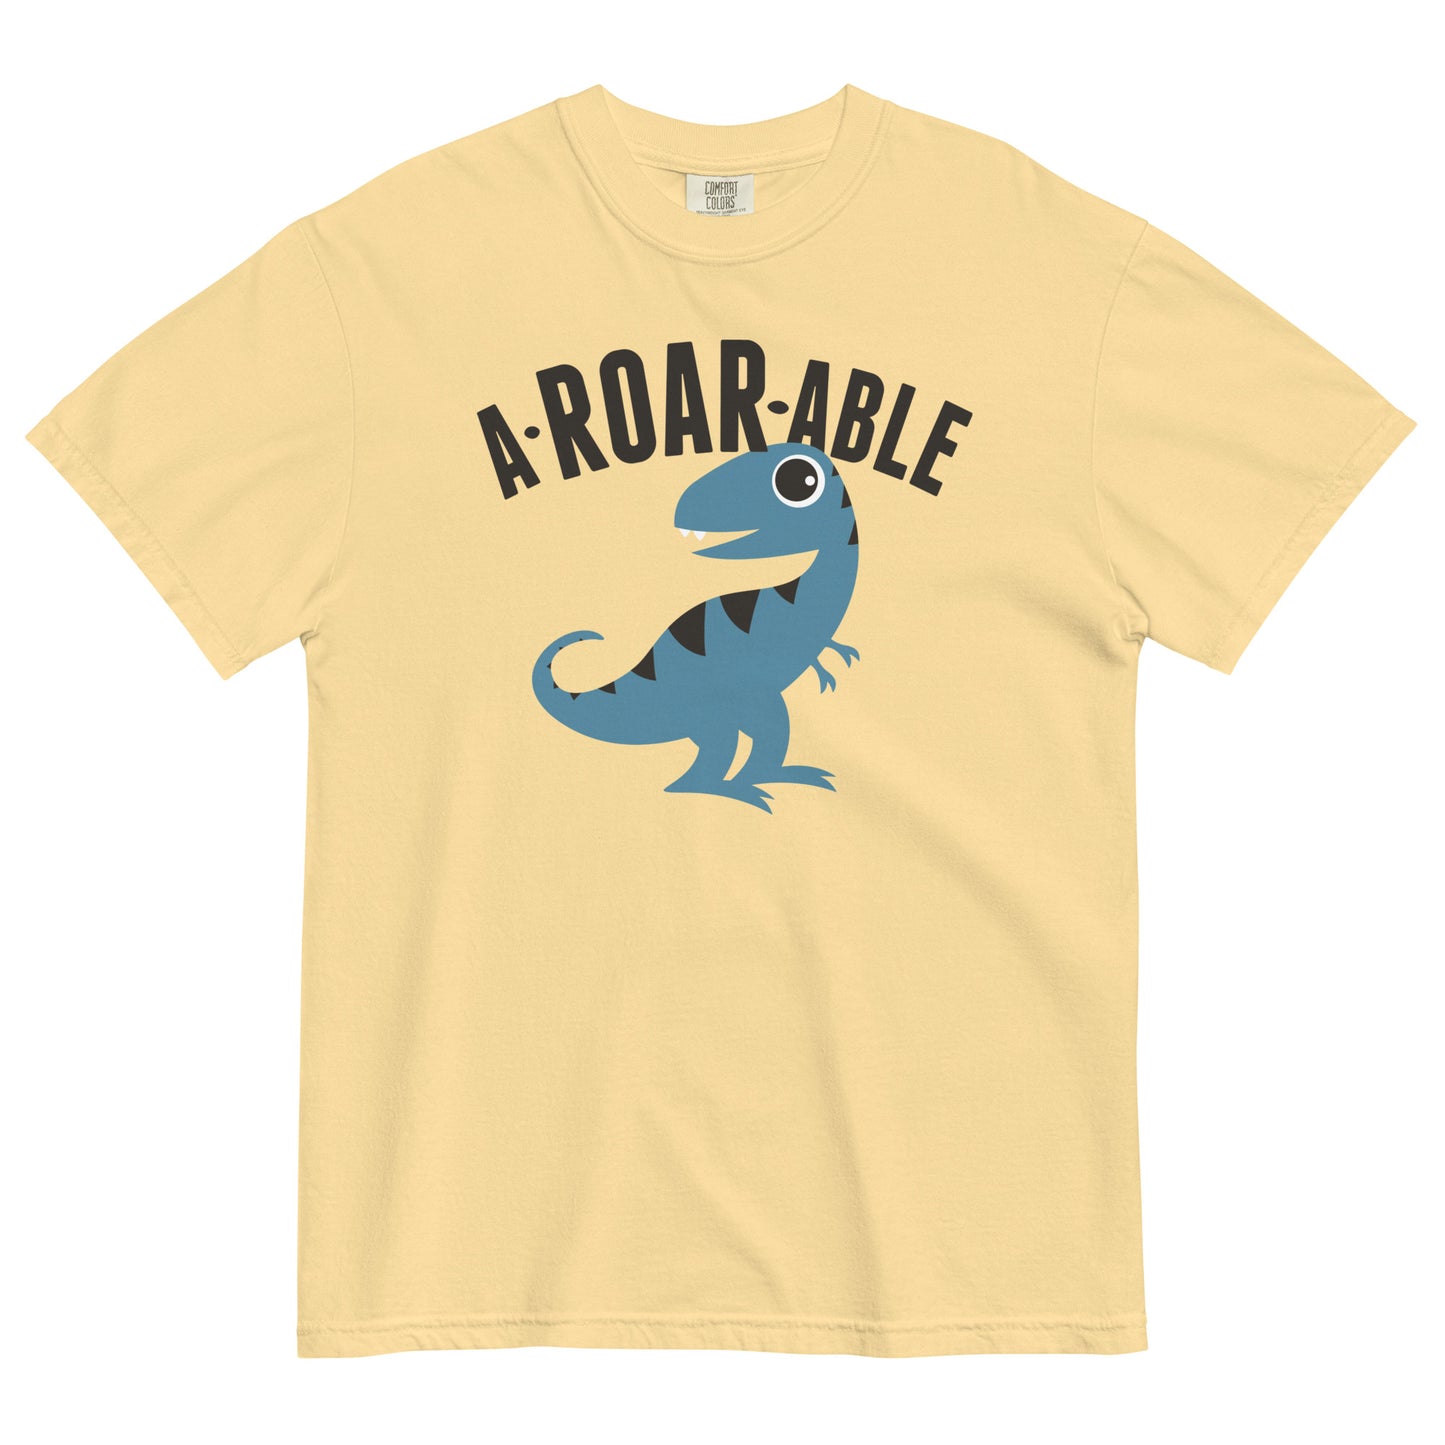 A-Roar-Able Men's Relaxed Fit Tee